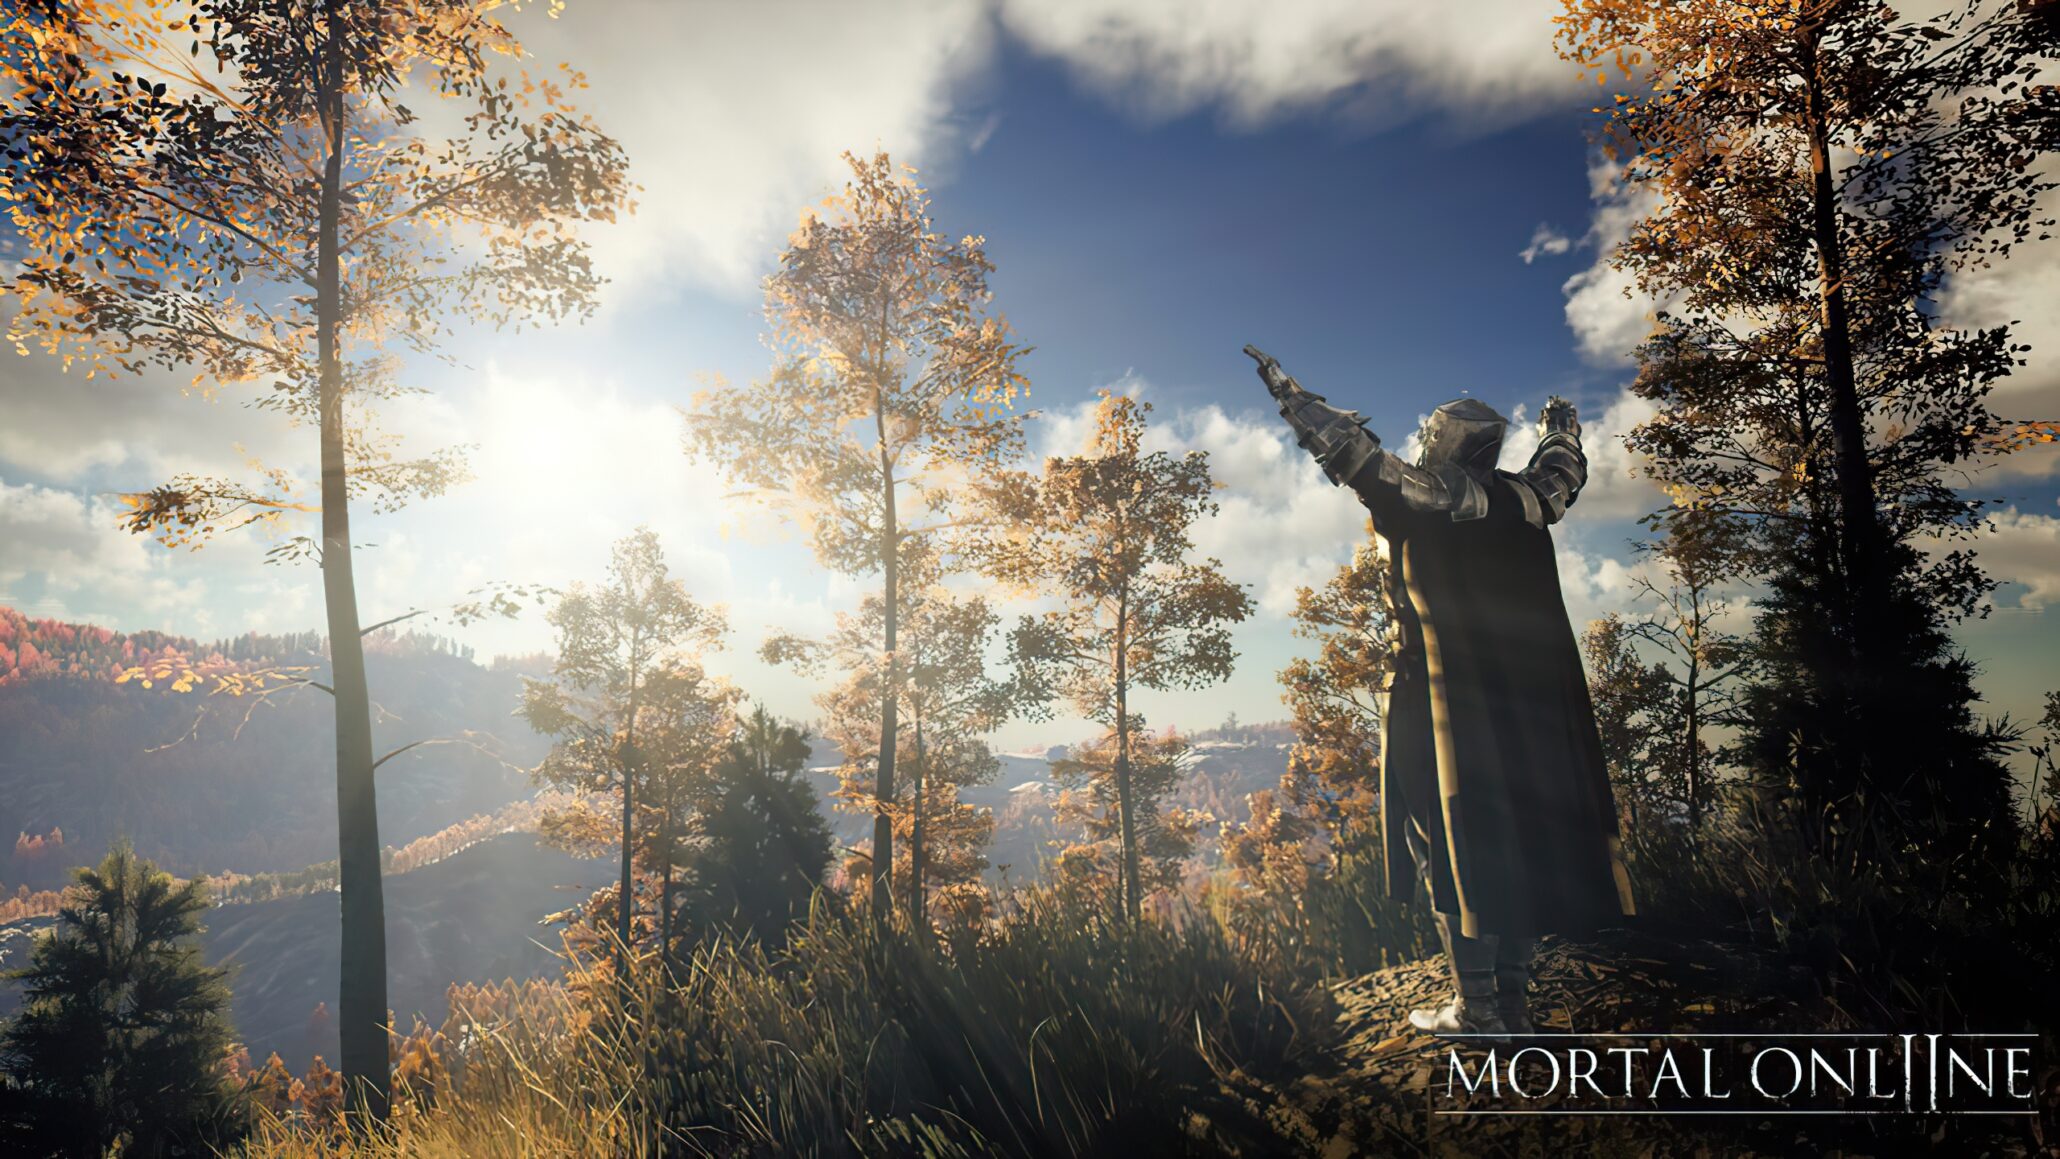 Mortal Online 2 Early Access is Now Available on Steam